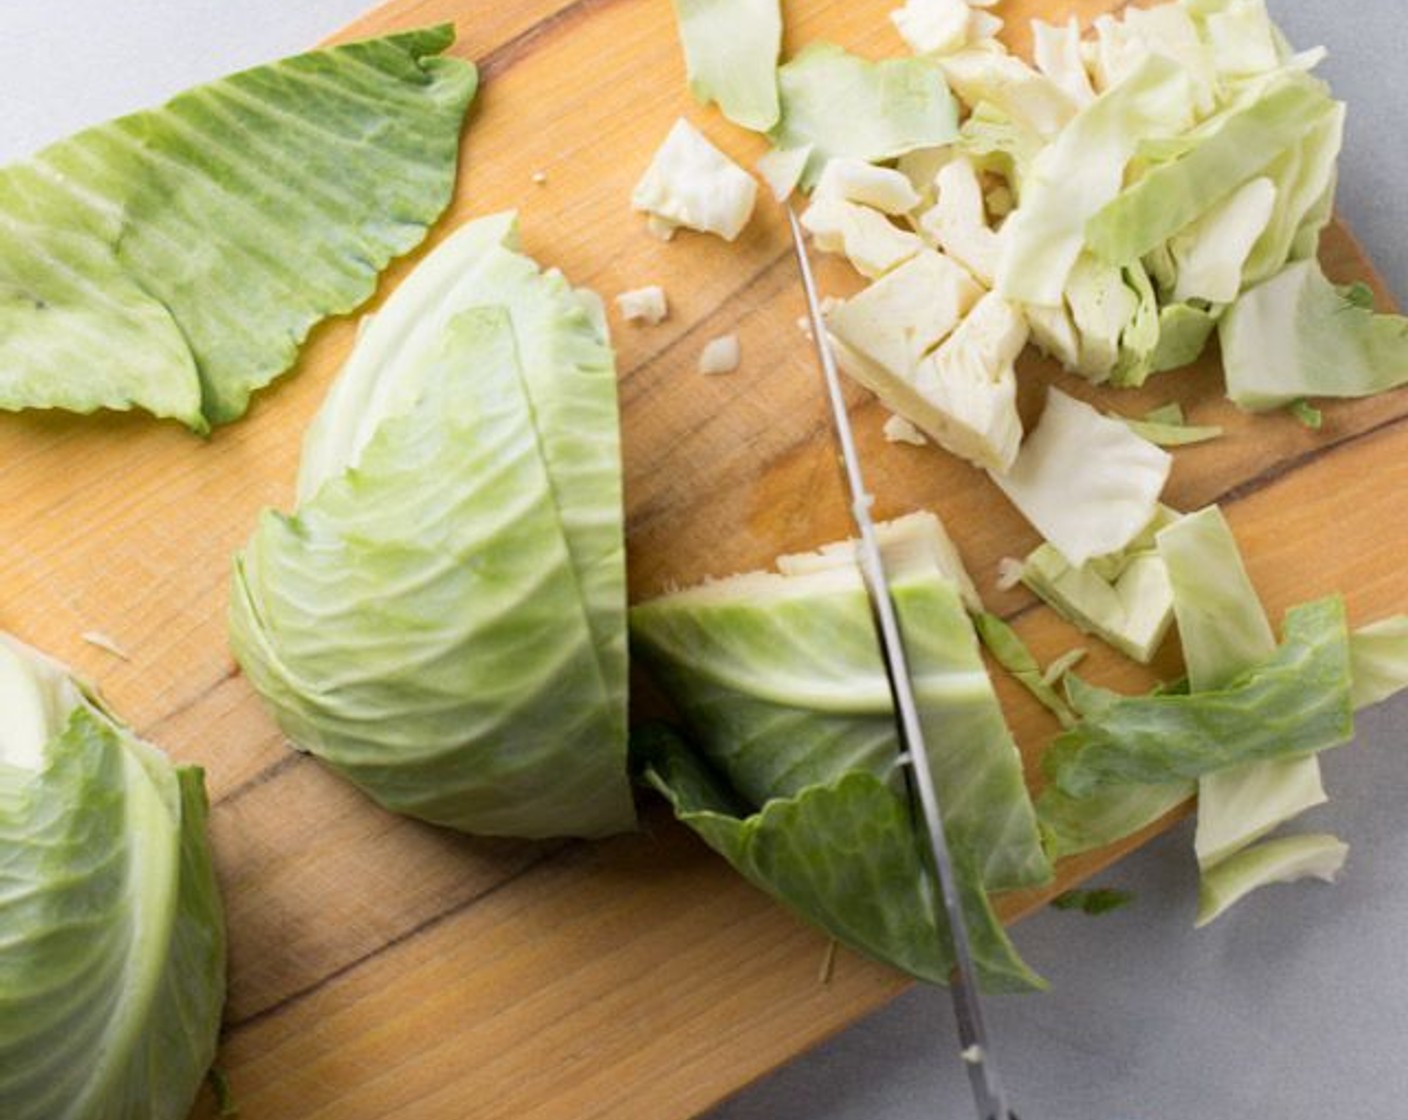 step 1 Chop the Green Cabbage (1 head) into about 1-inch chunks. Remove and discard the hard core.